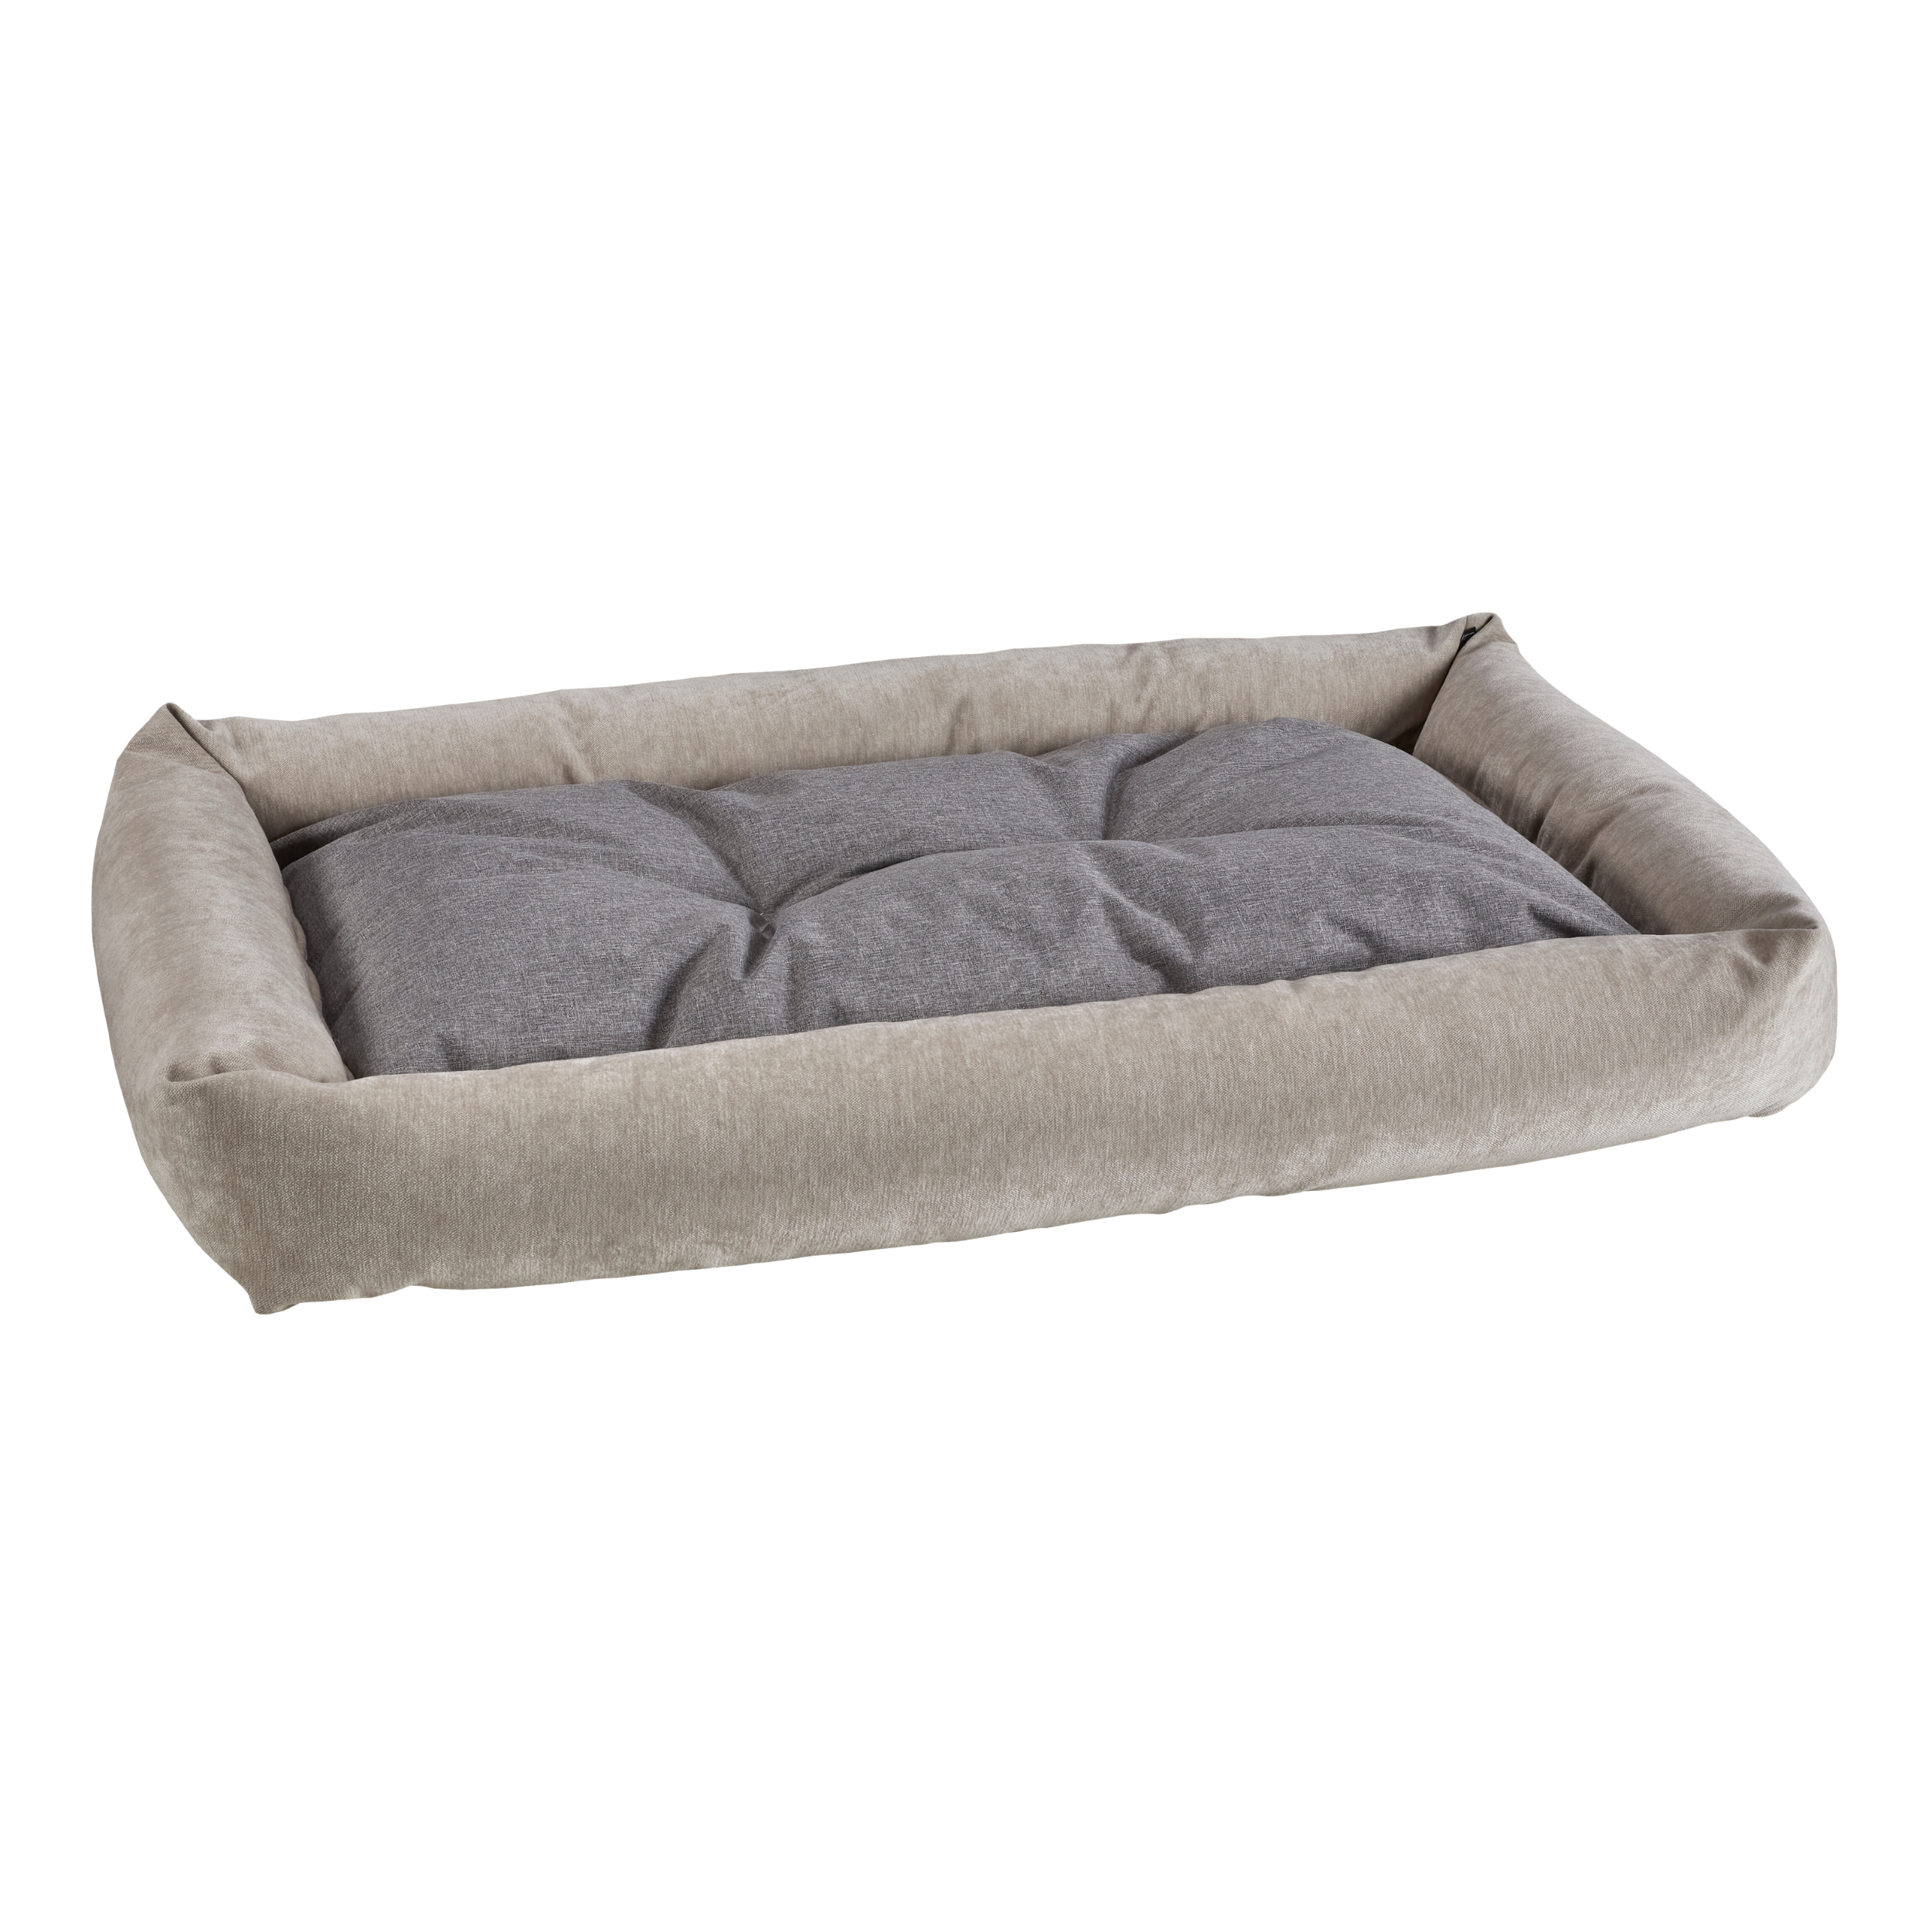 OYSTER-TANGO-DOG-BED-KENNEL-CRATE-MAT